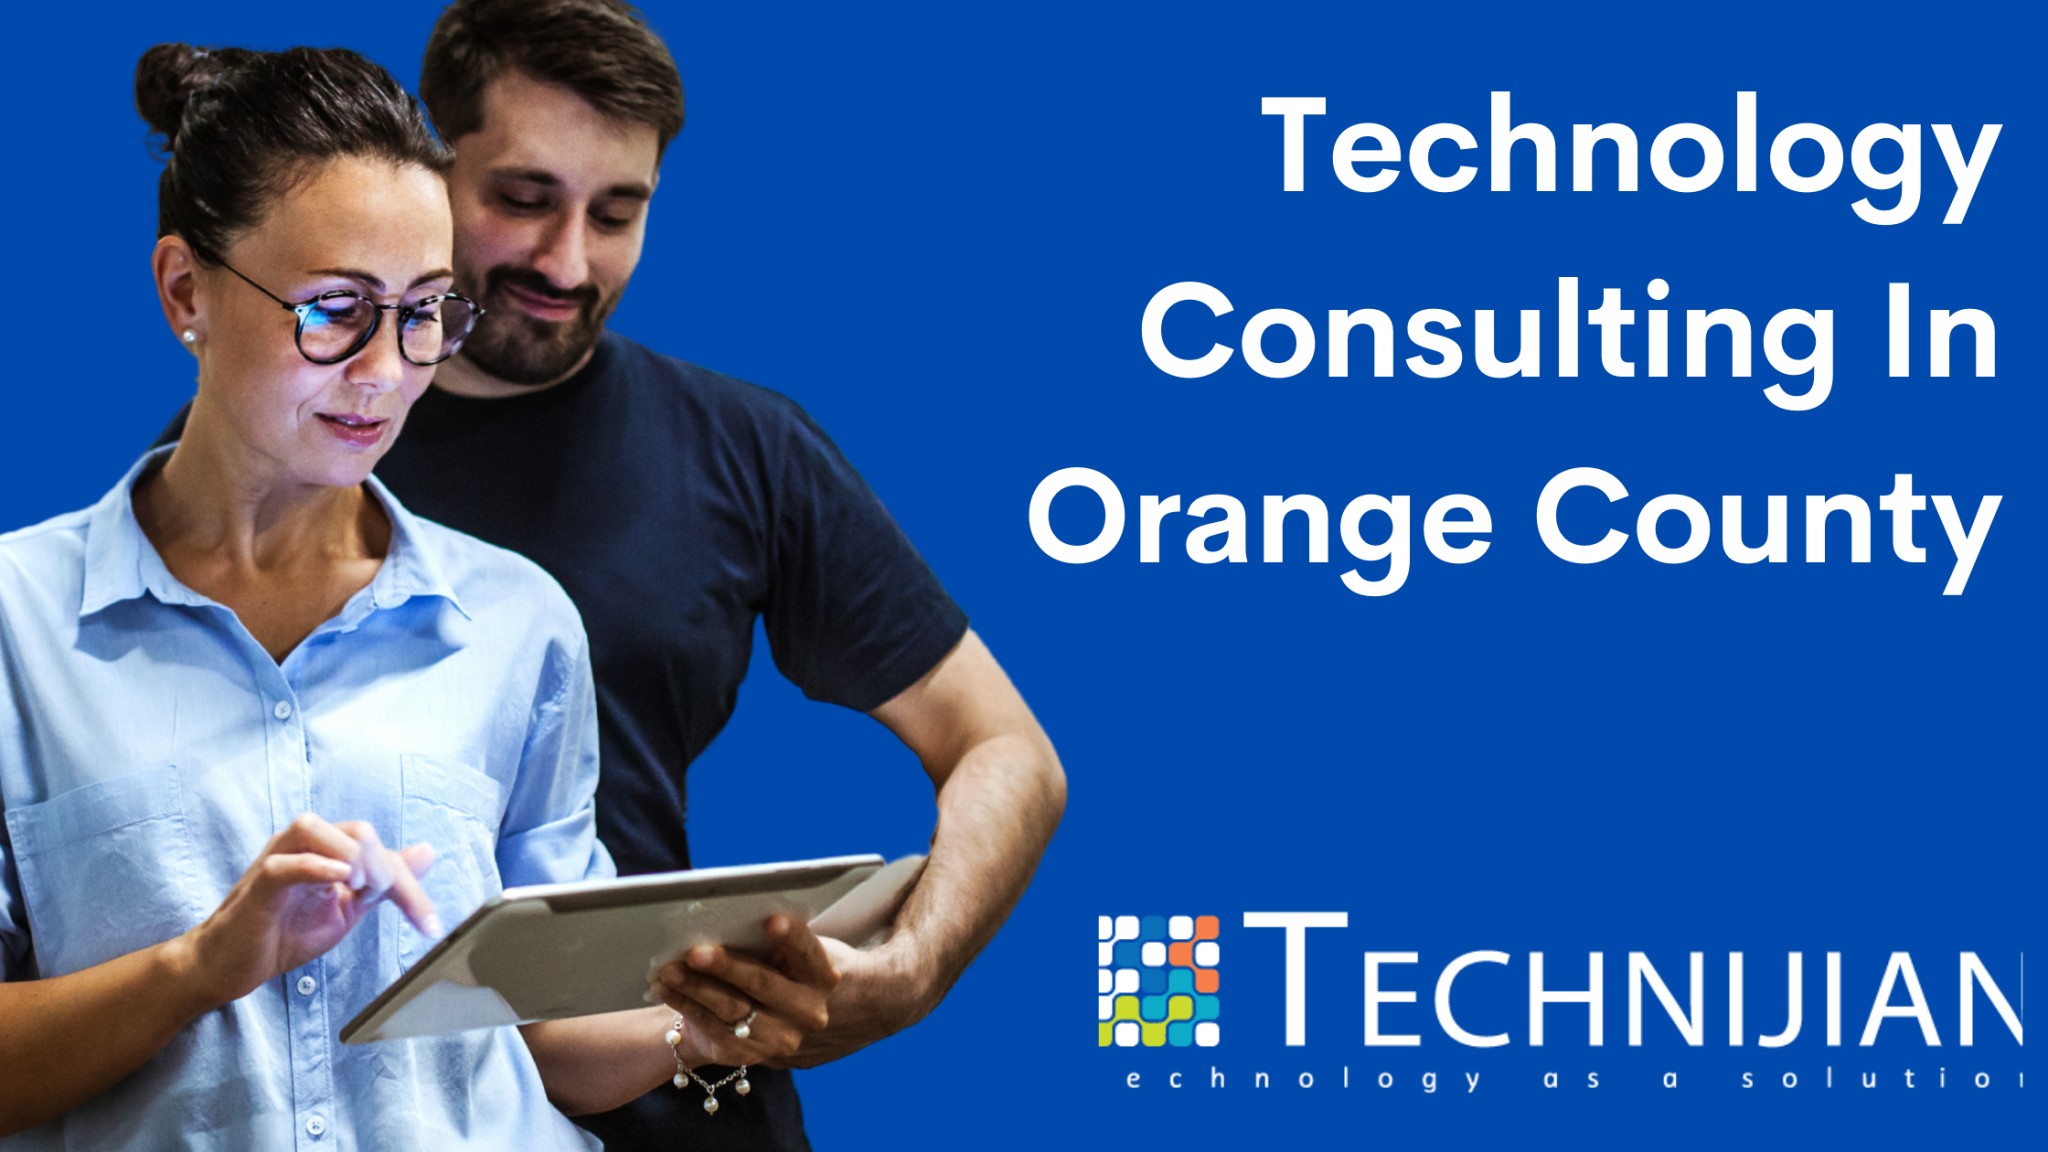 Technology Consulting In Orange County